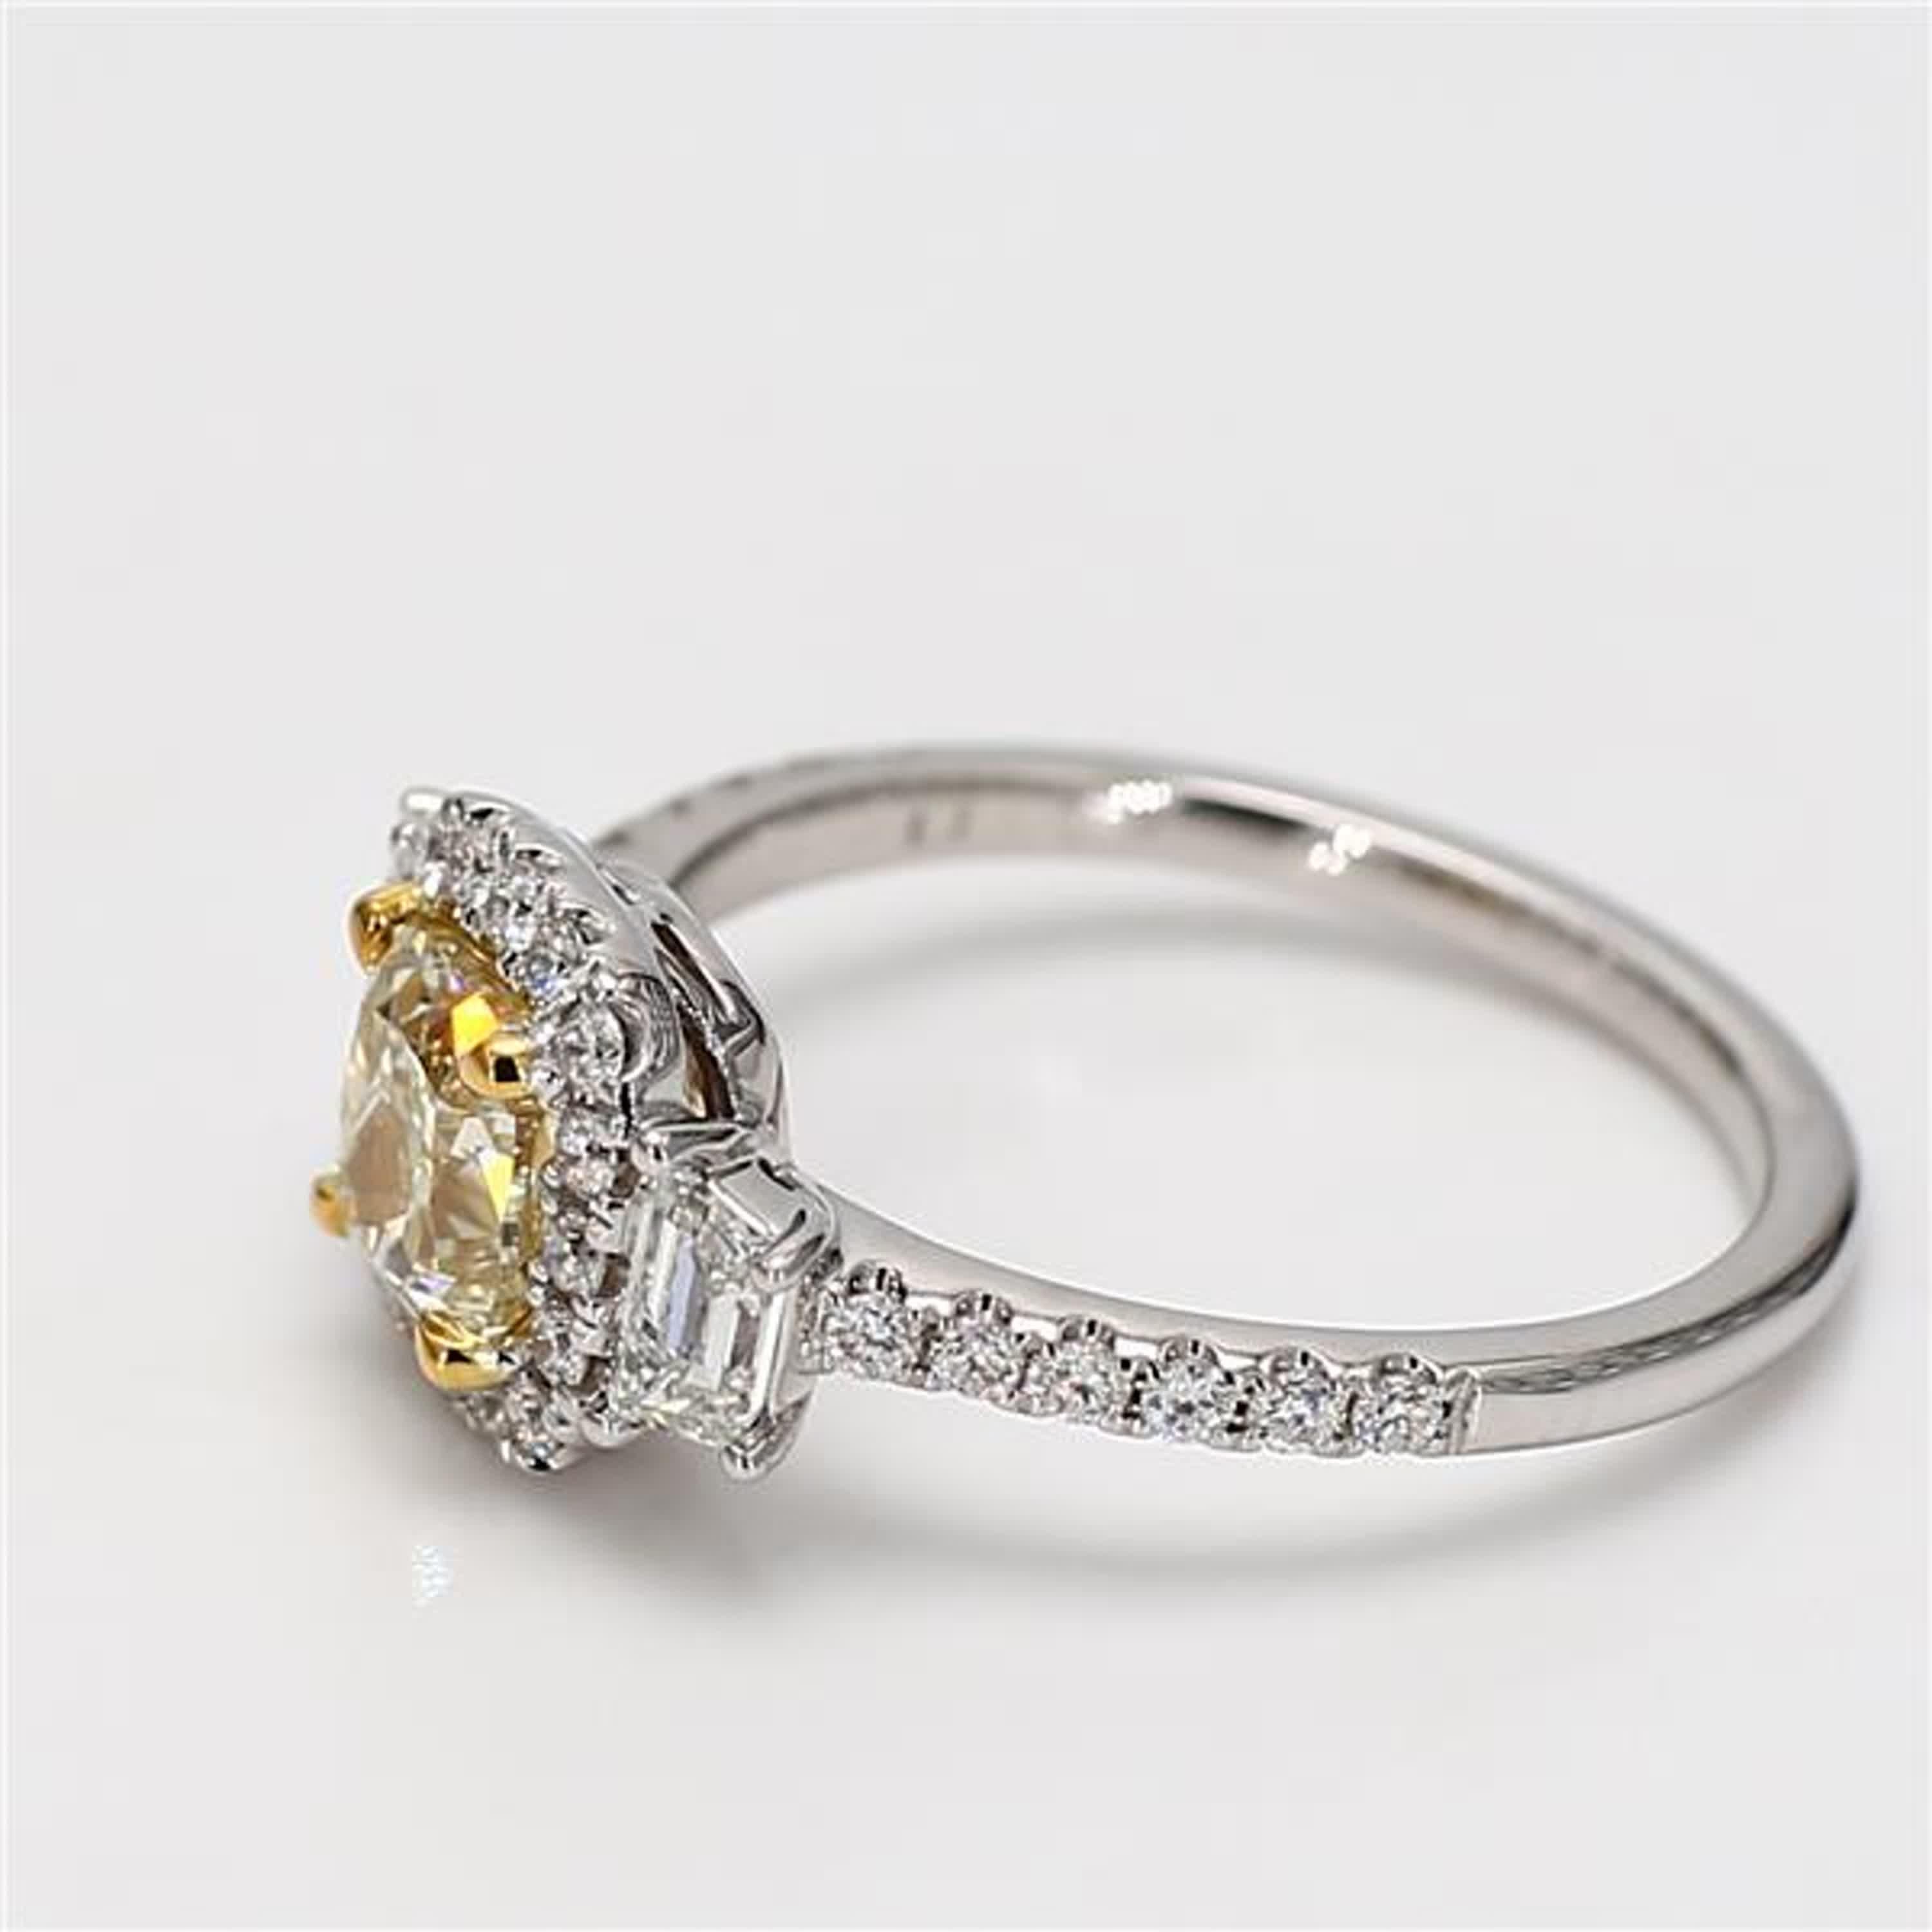 Contemporary GIA Certified Natural Yellow Cushion Diamond 1.63 Carat TW Gold Cocktail Ring